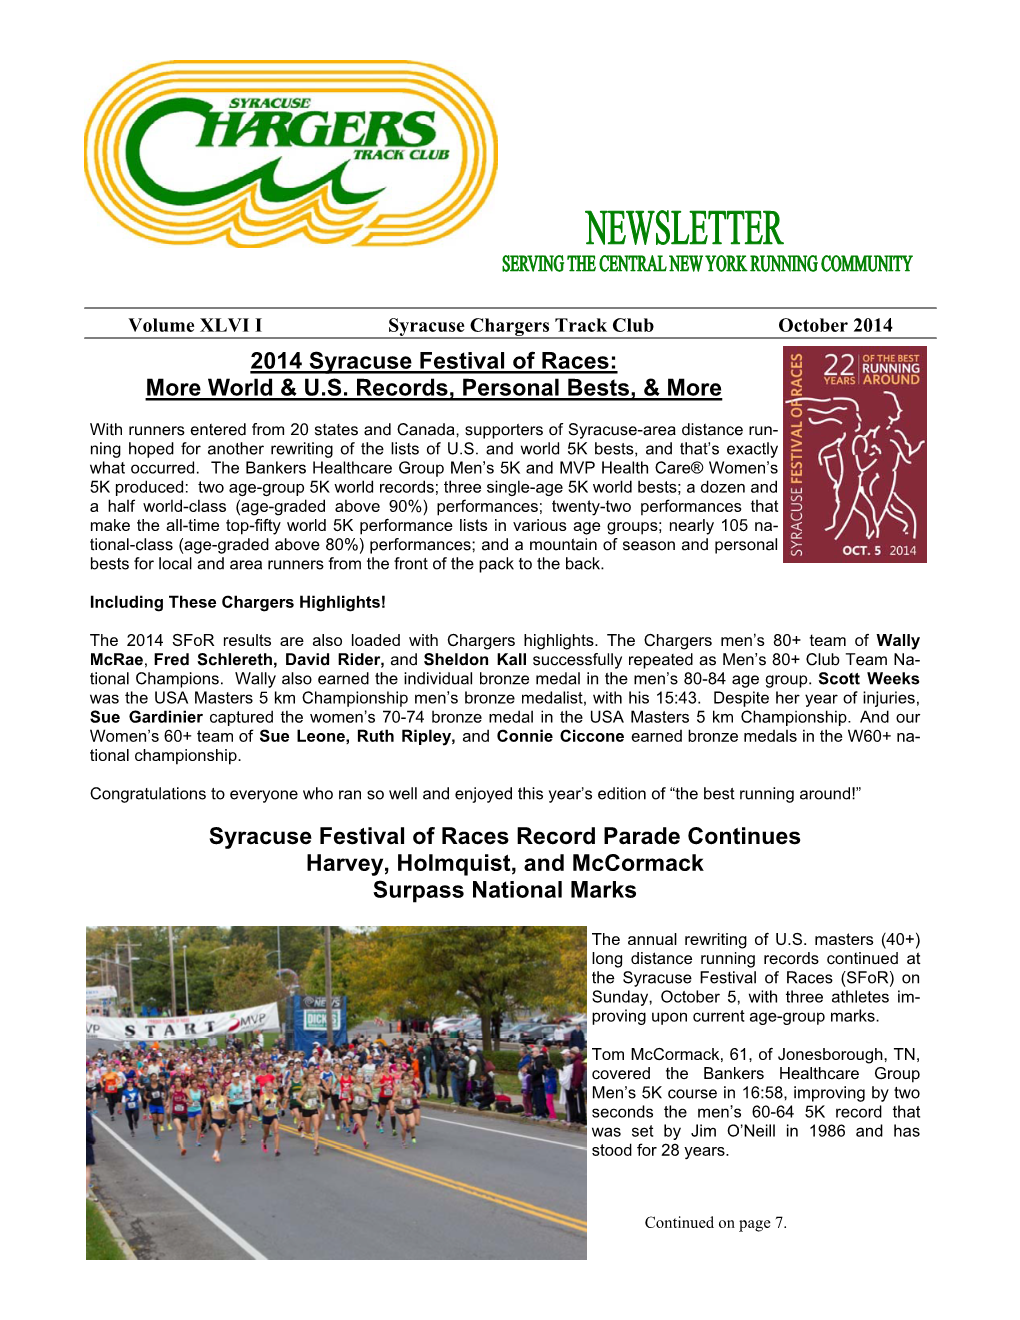 Syr Charger Newsletter-Oct 2014.Pub